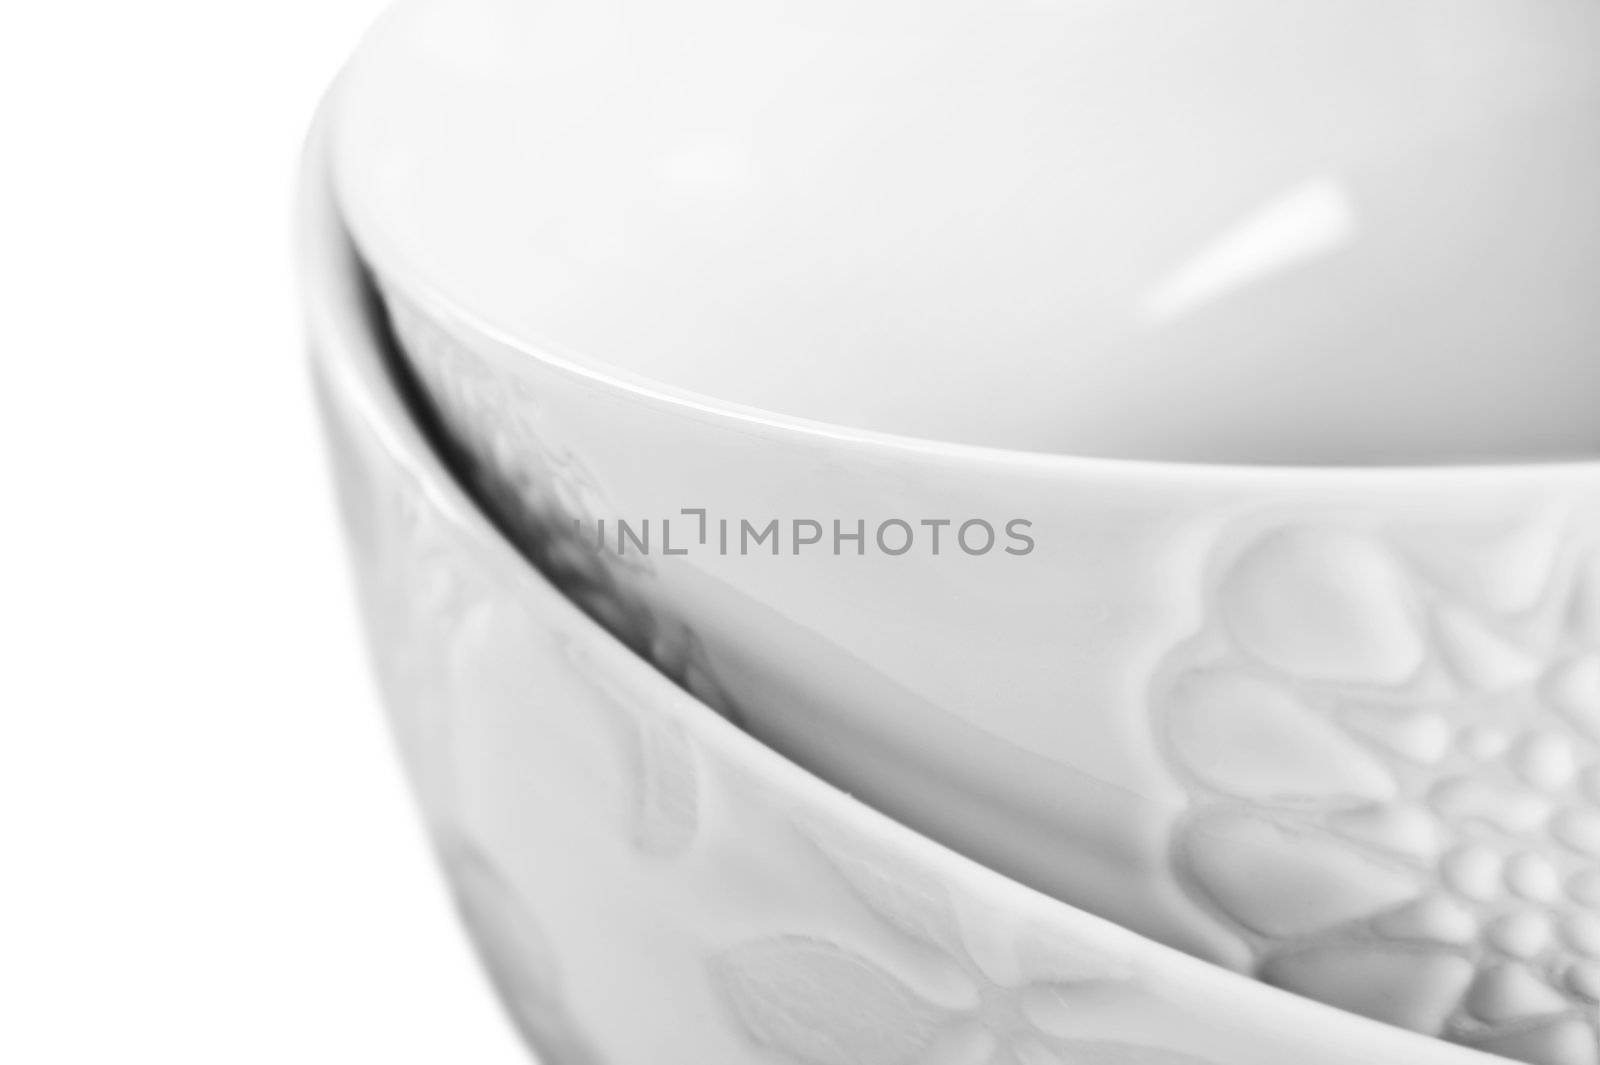 Close up of two white bowls